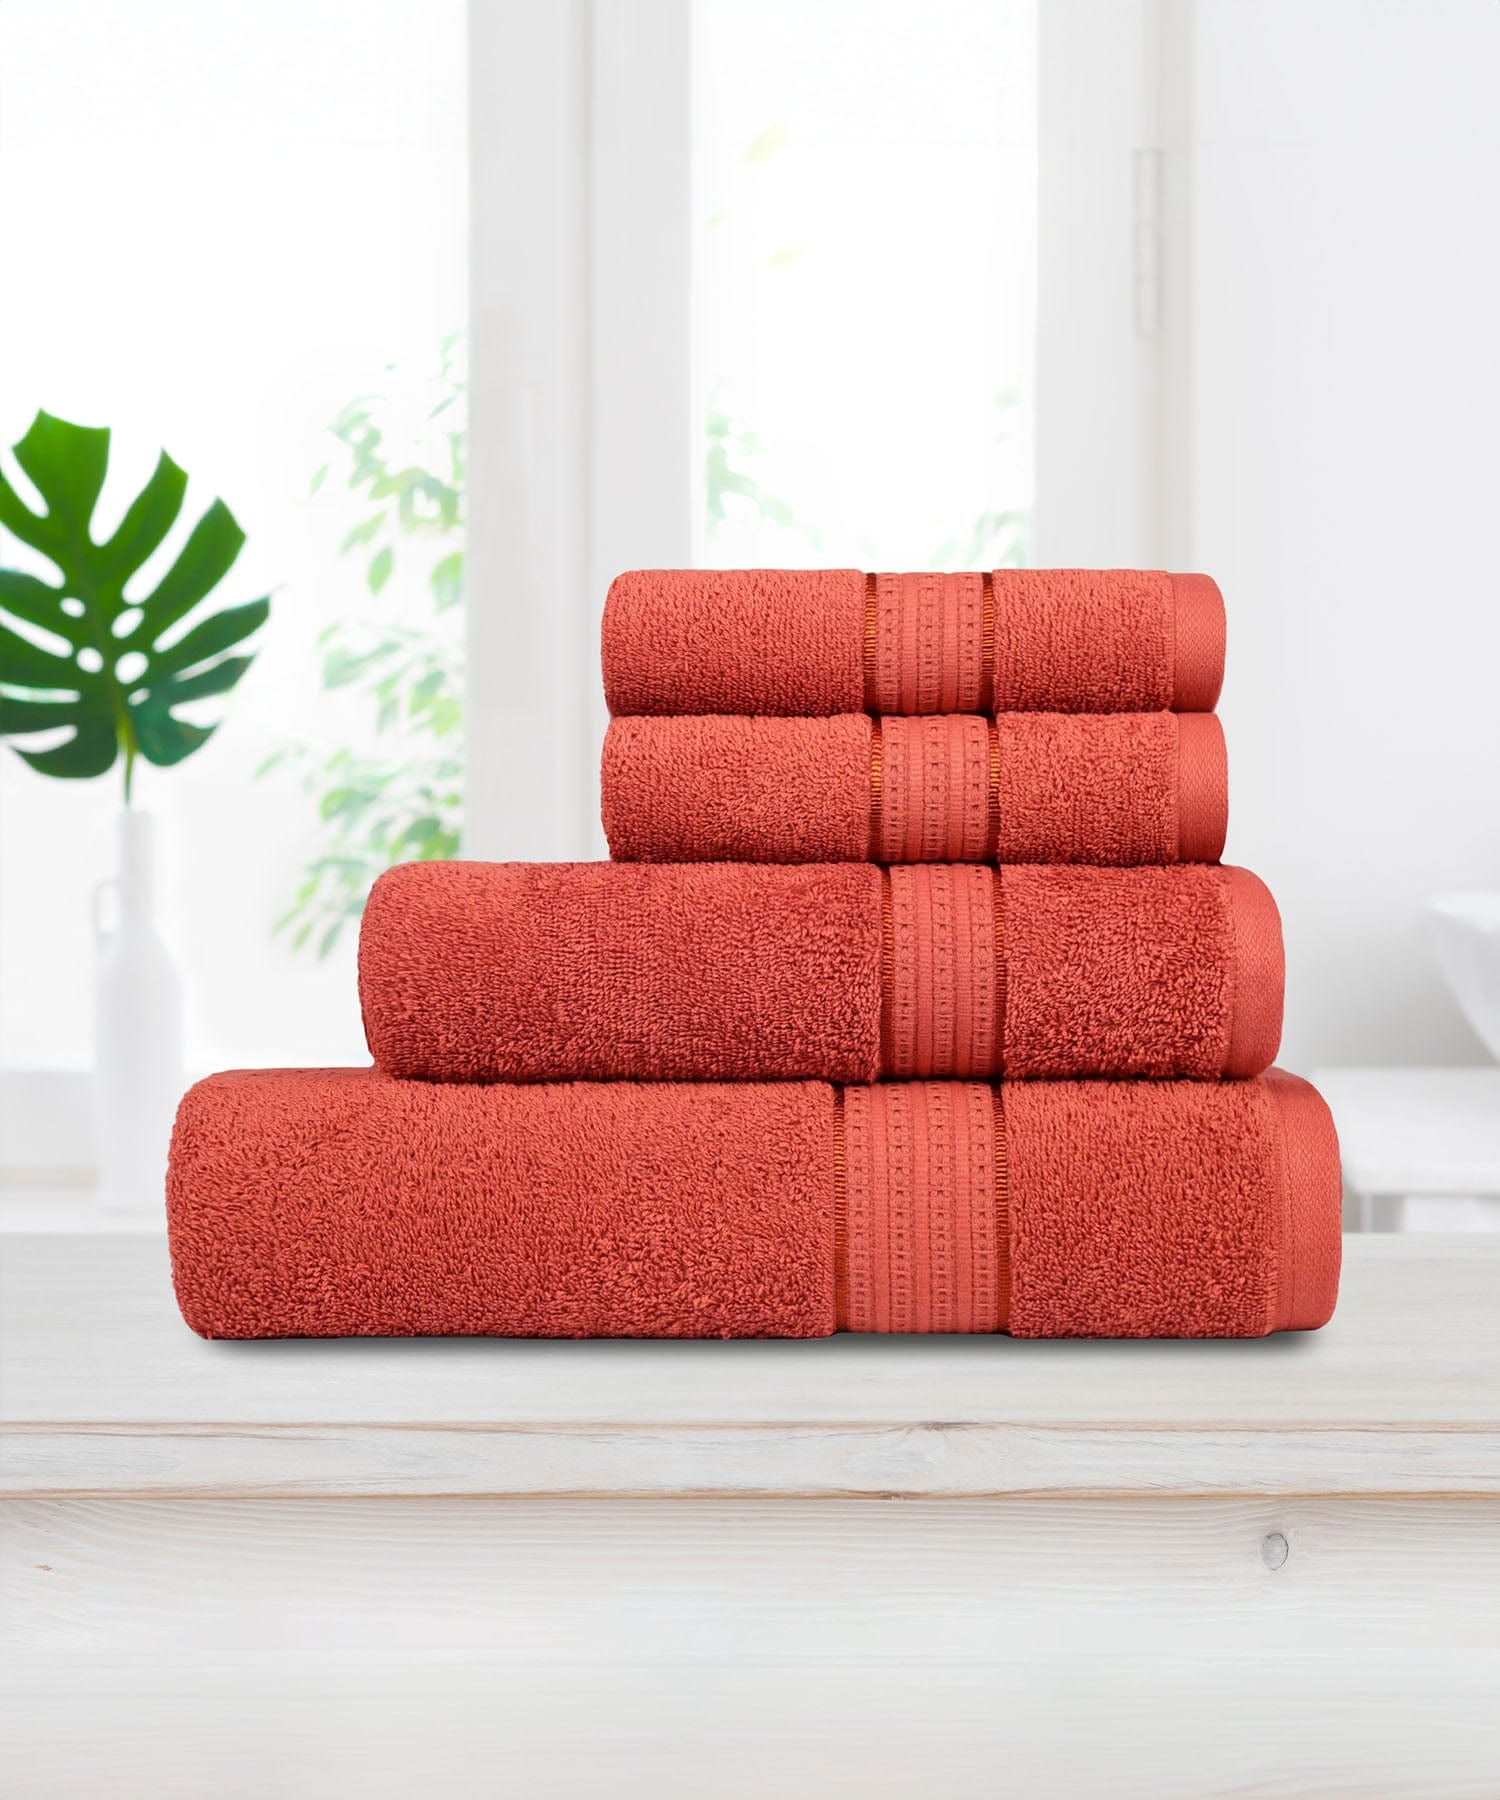 400 GSM , CARNIVAL TOWEL,100% Cotton,Durable,Super Soft, RED RUST